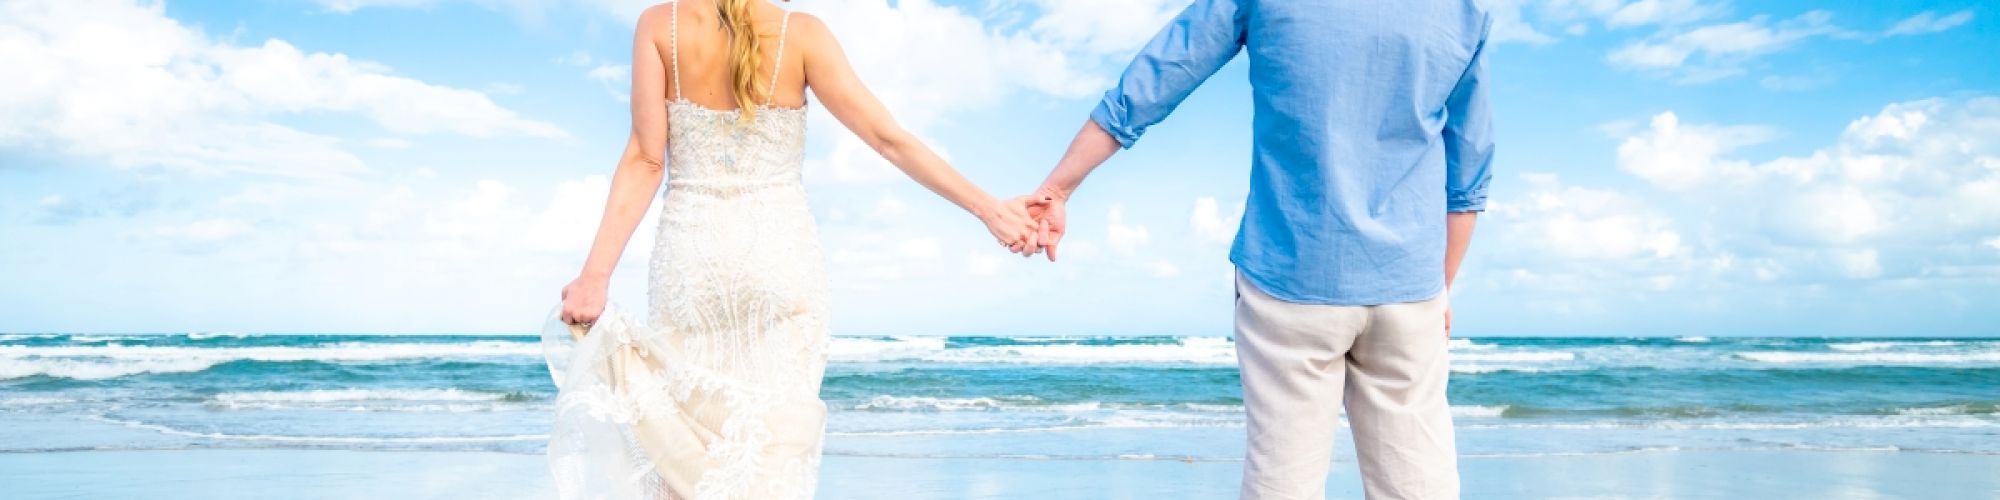 A couple holds hands while standing on a sandy beach, facing the ocean, with reflections on the wet sand and a bright blue sky above.